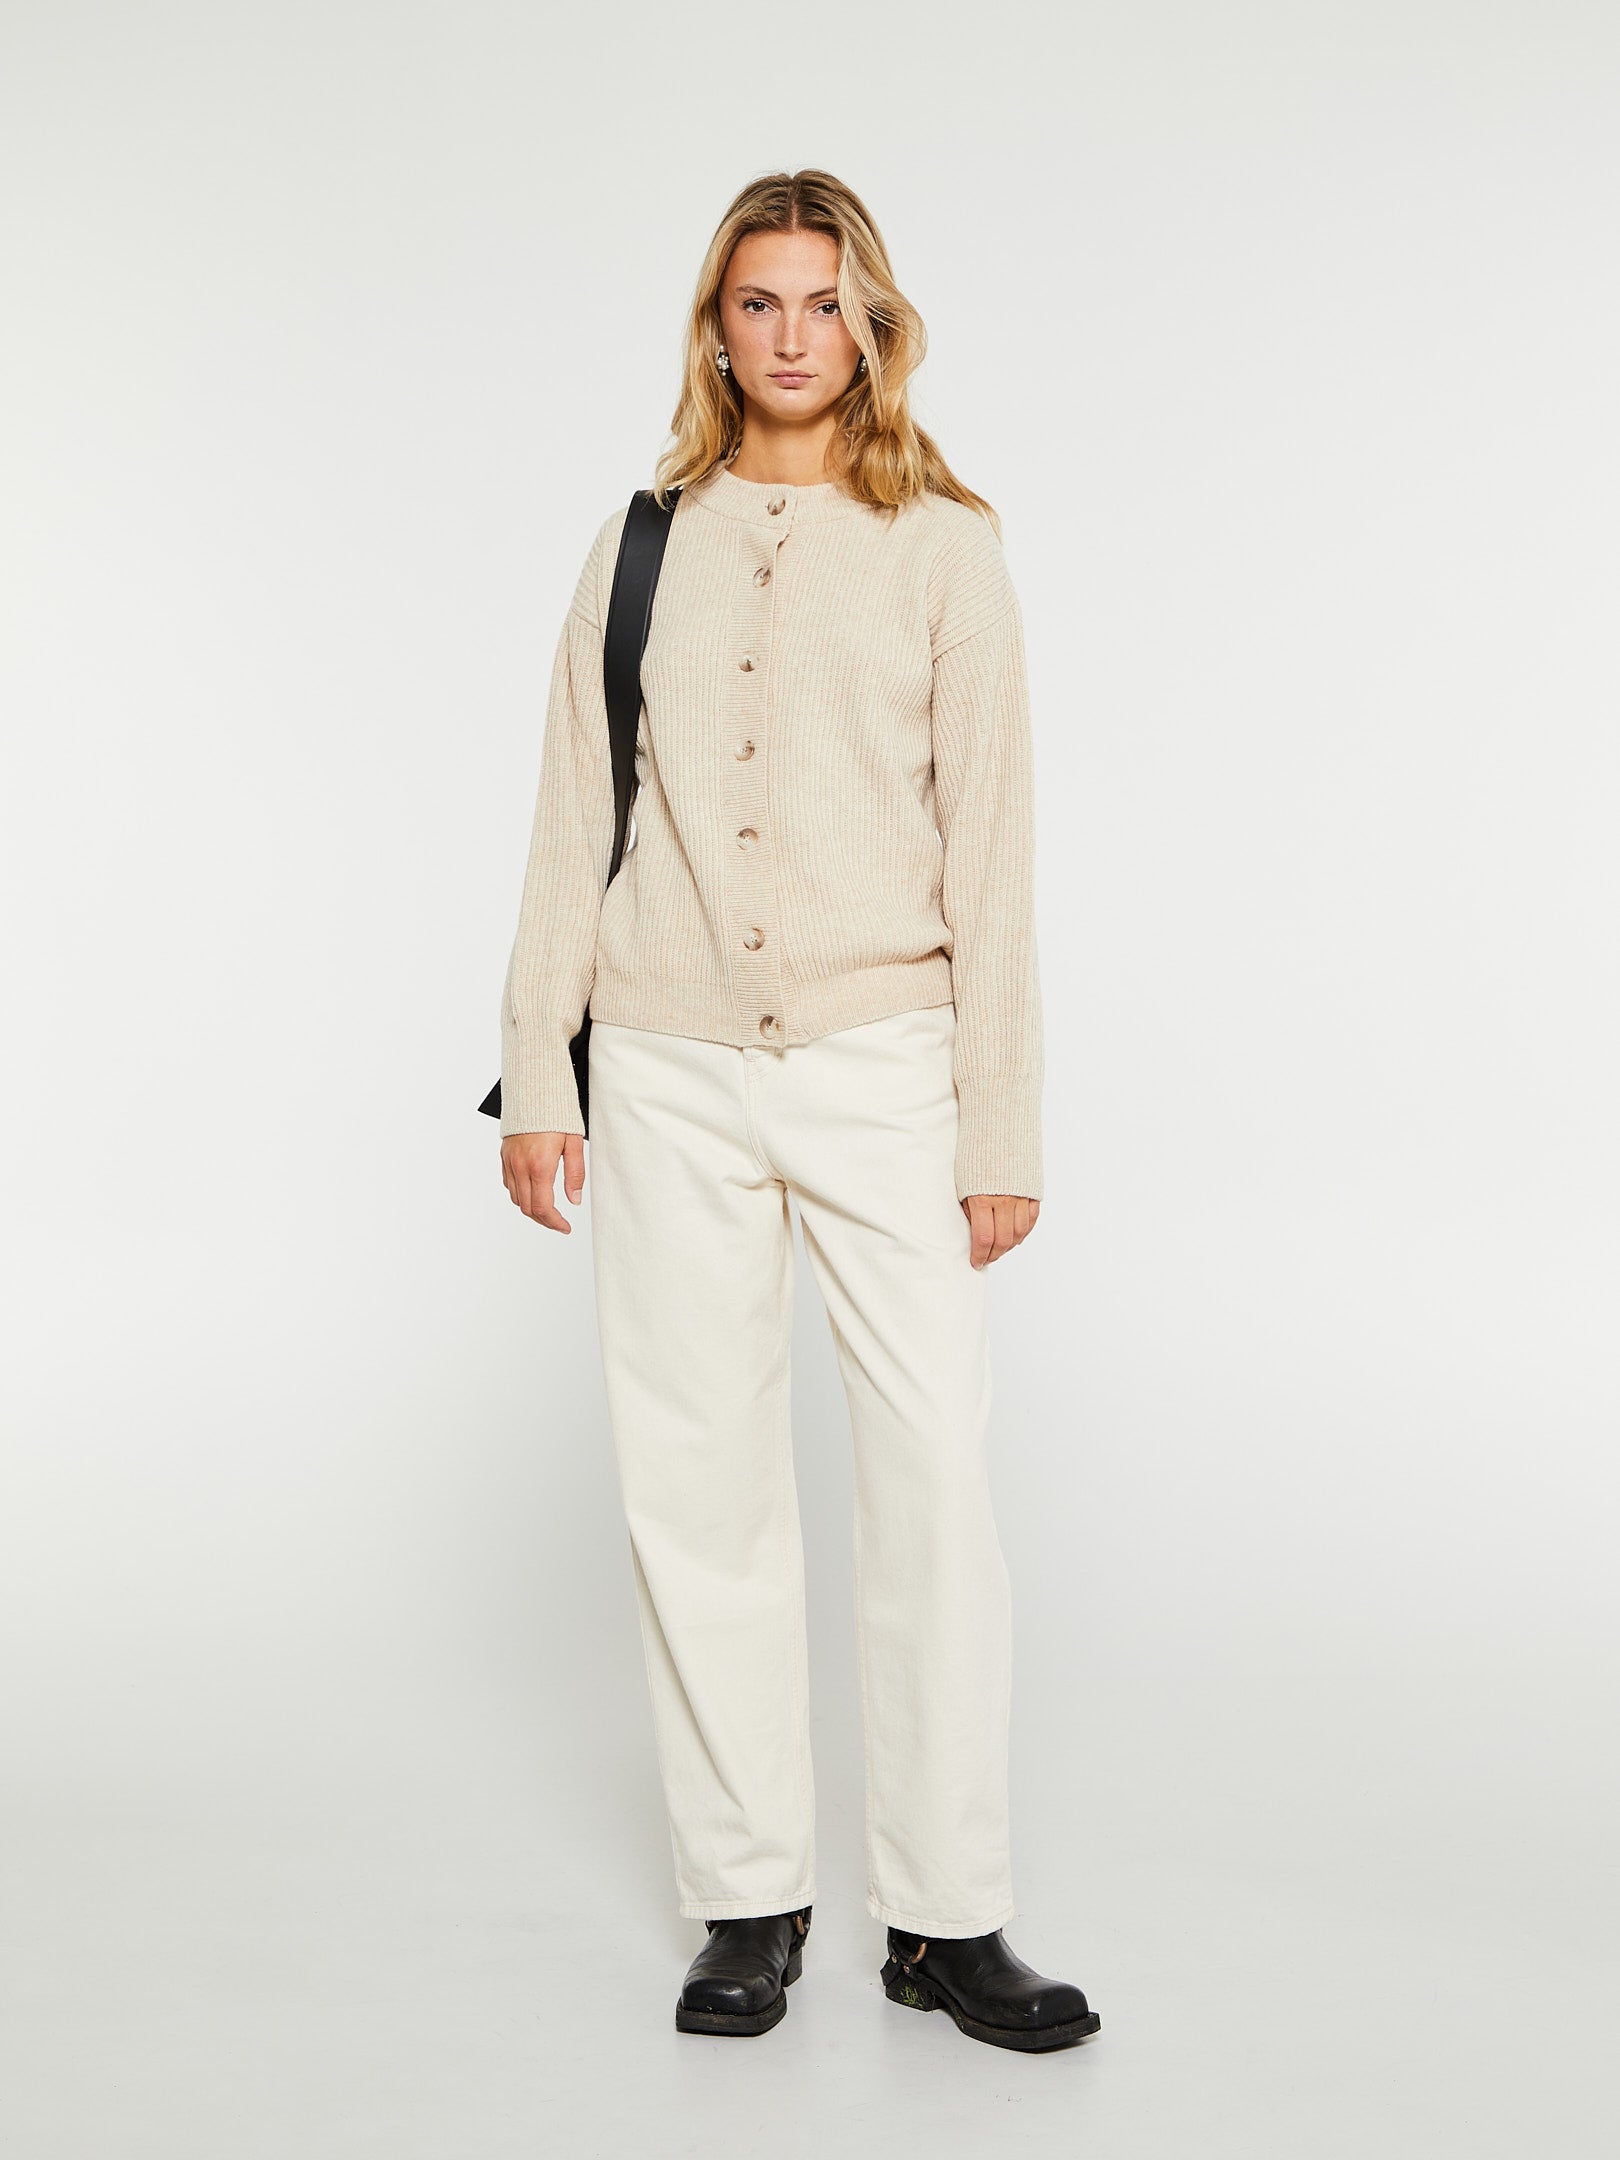 Women's Derby Pant in Natural Rinsed